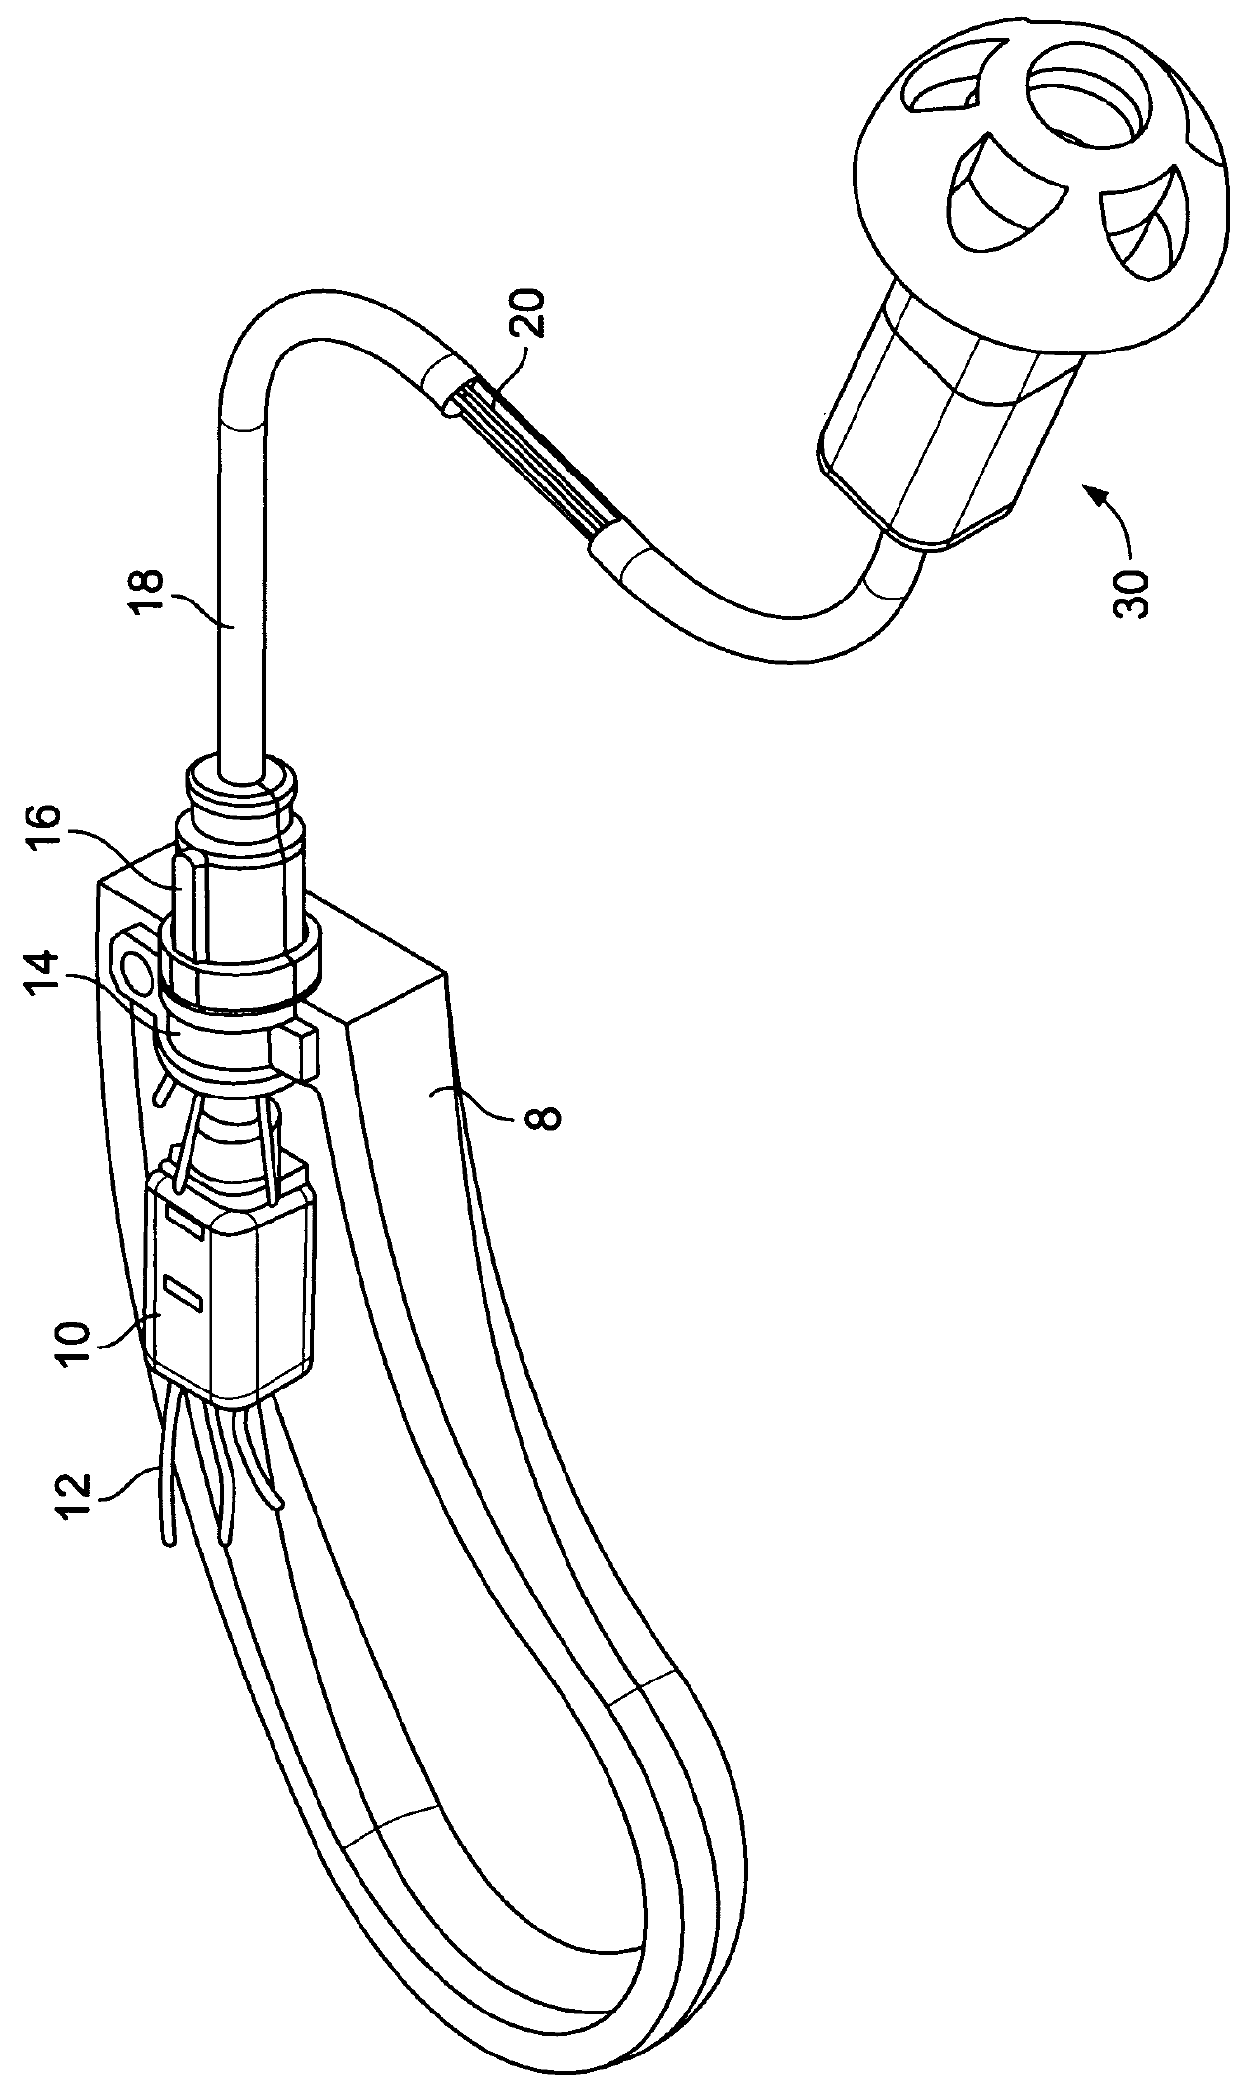 Connector assembly comprising a first part and a second part attachable to and detachable from each other